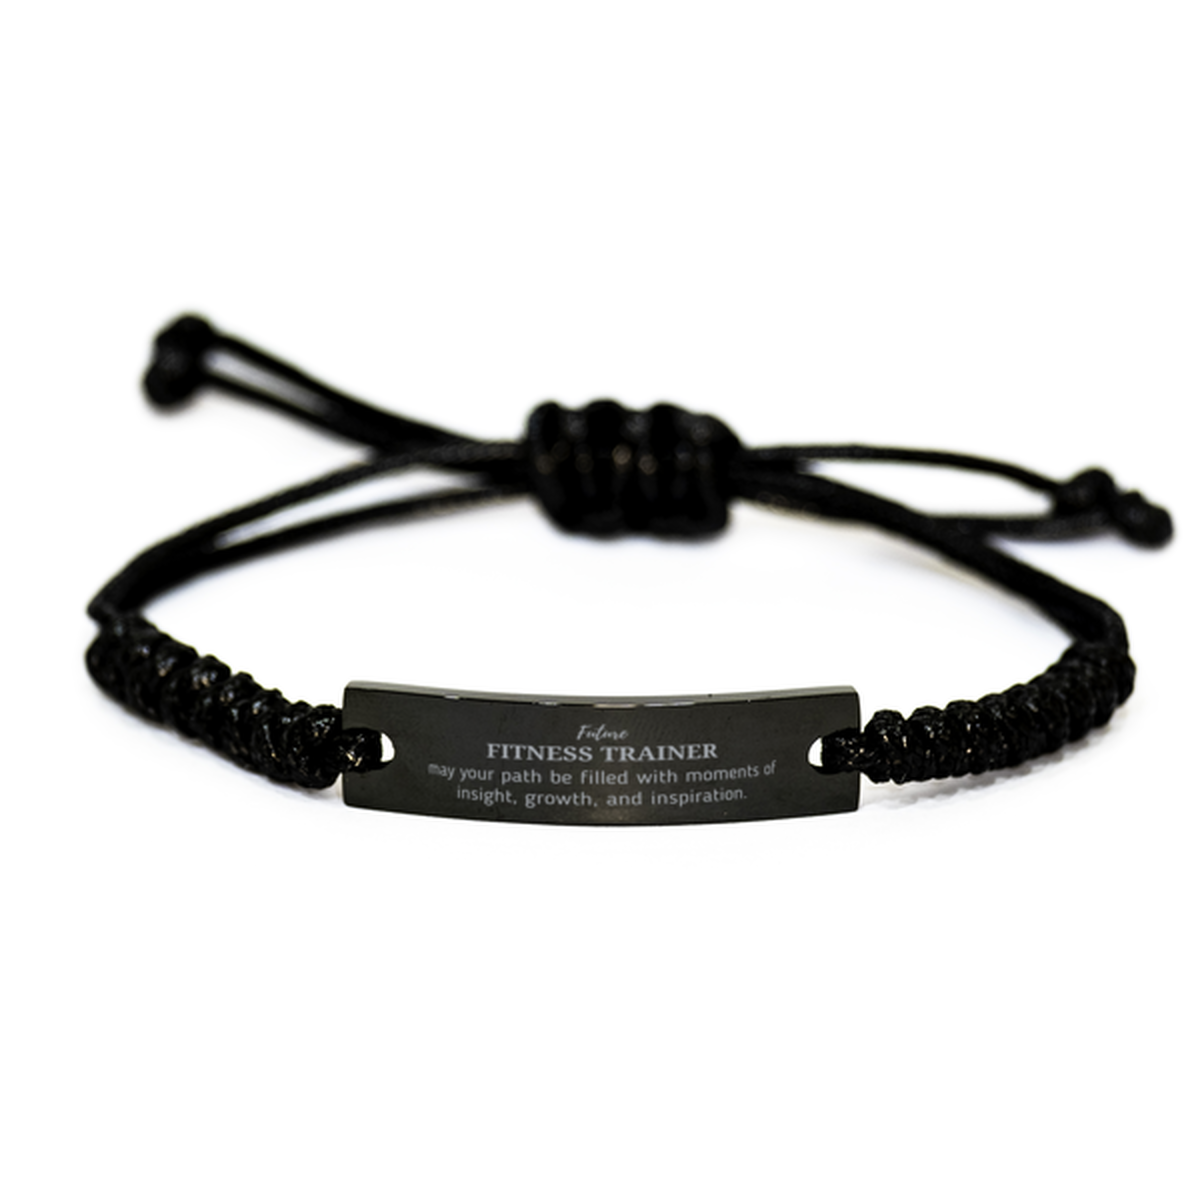 Future Fitness Trainer Gifts, May your path be filled with moments of insight, Graduation Gifts for New Fitness Trainer, Christmas Unique Black Rope Bracelet For Men, Women, Friends